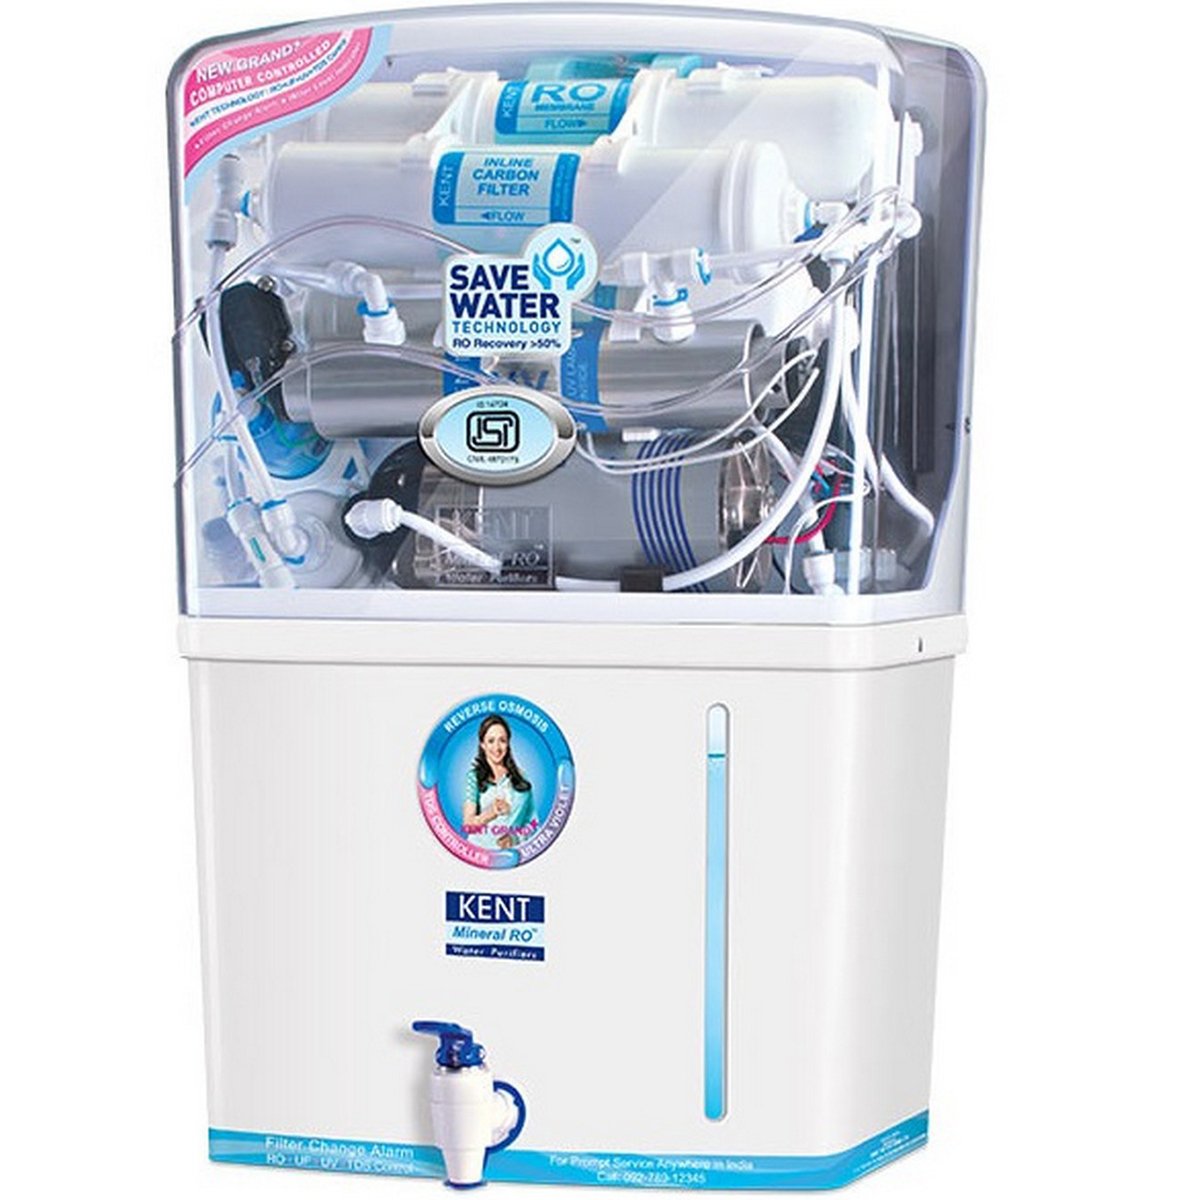 Kent Grand+ Mineral RO+UV+UF Water Purifier with TDS Controller